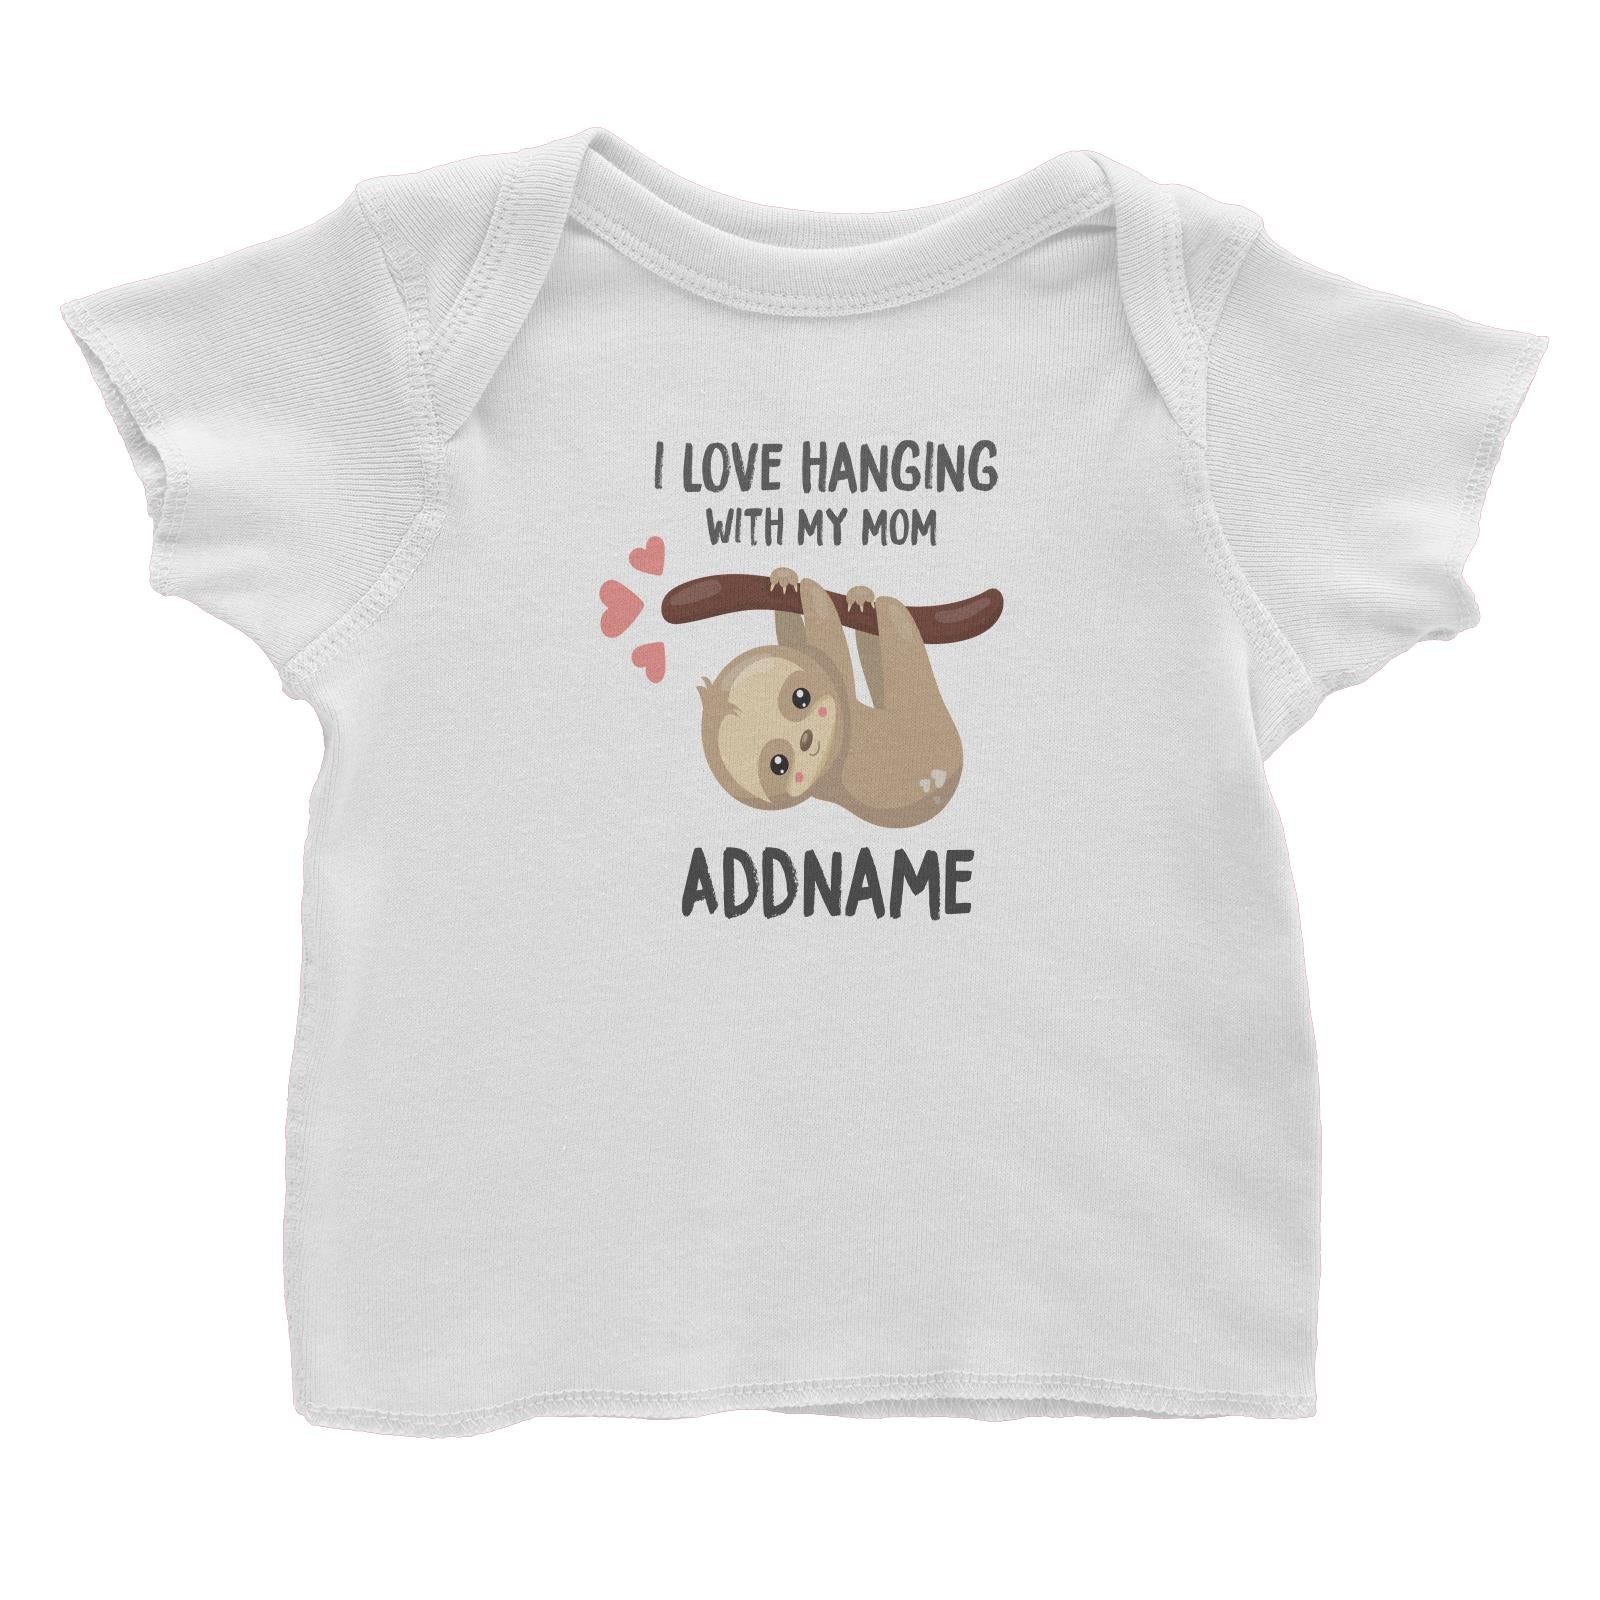 Cute Sloth I Love Hanging With My Mom Addname Baby T-Shirt